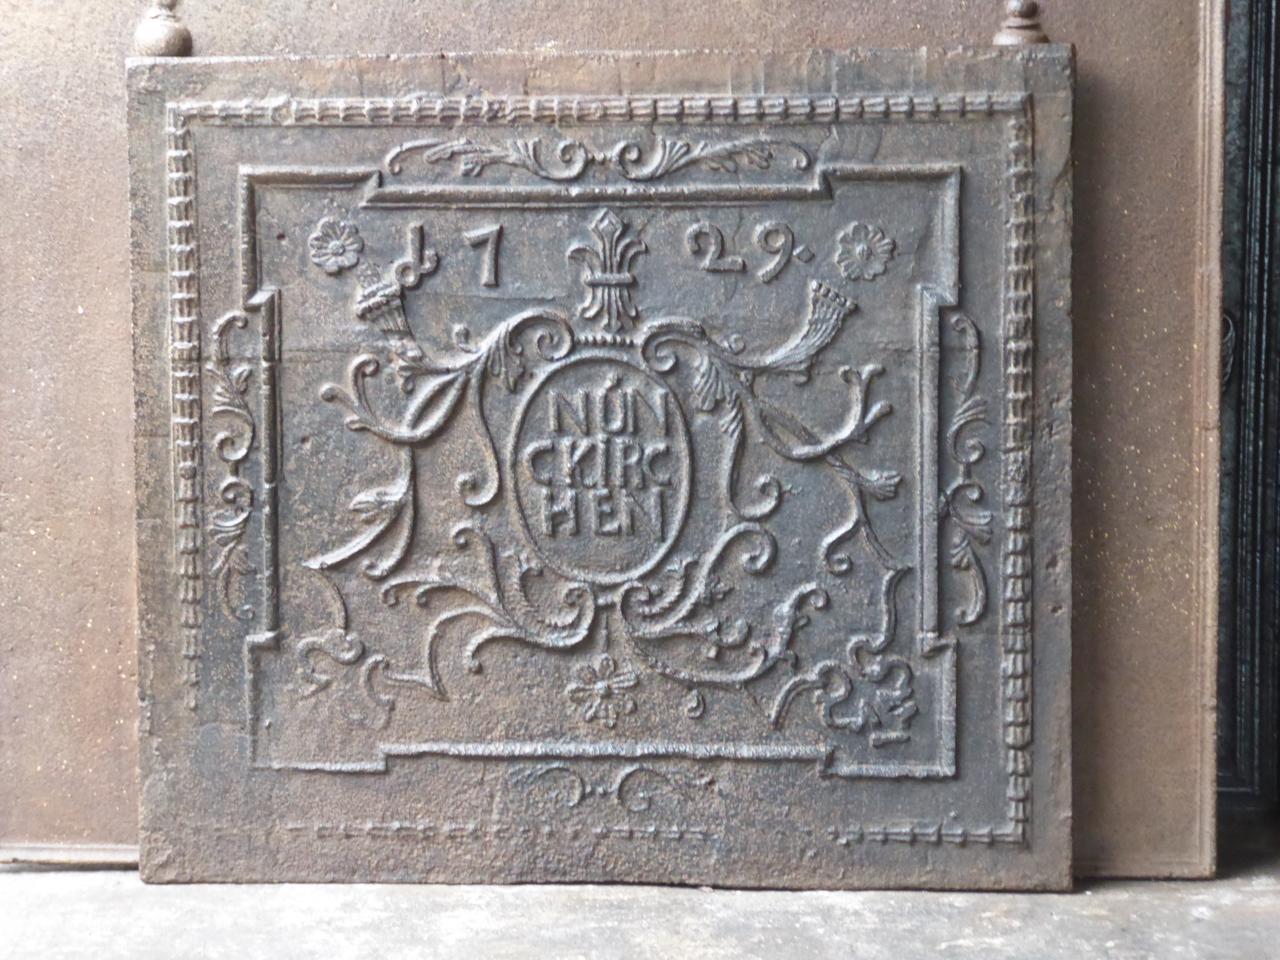 German Louis XV fireback with decoration around the name Nünckirchen. It refers to the former foundry at Neunkirchen in Germany which operated since 1593. The date of production, 1729, is also cast in the fireback. The fireback has a natural brown